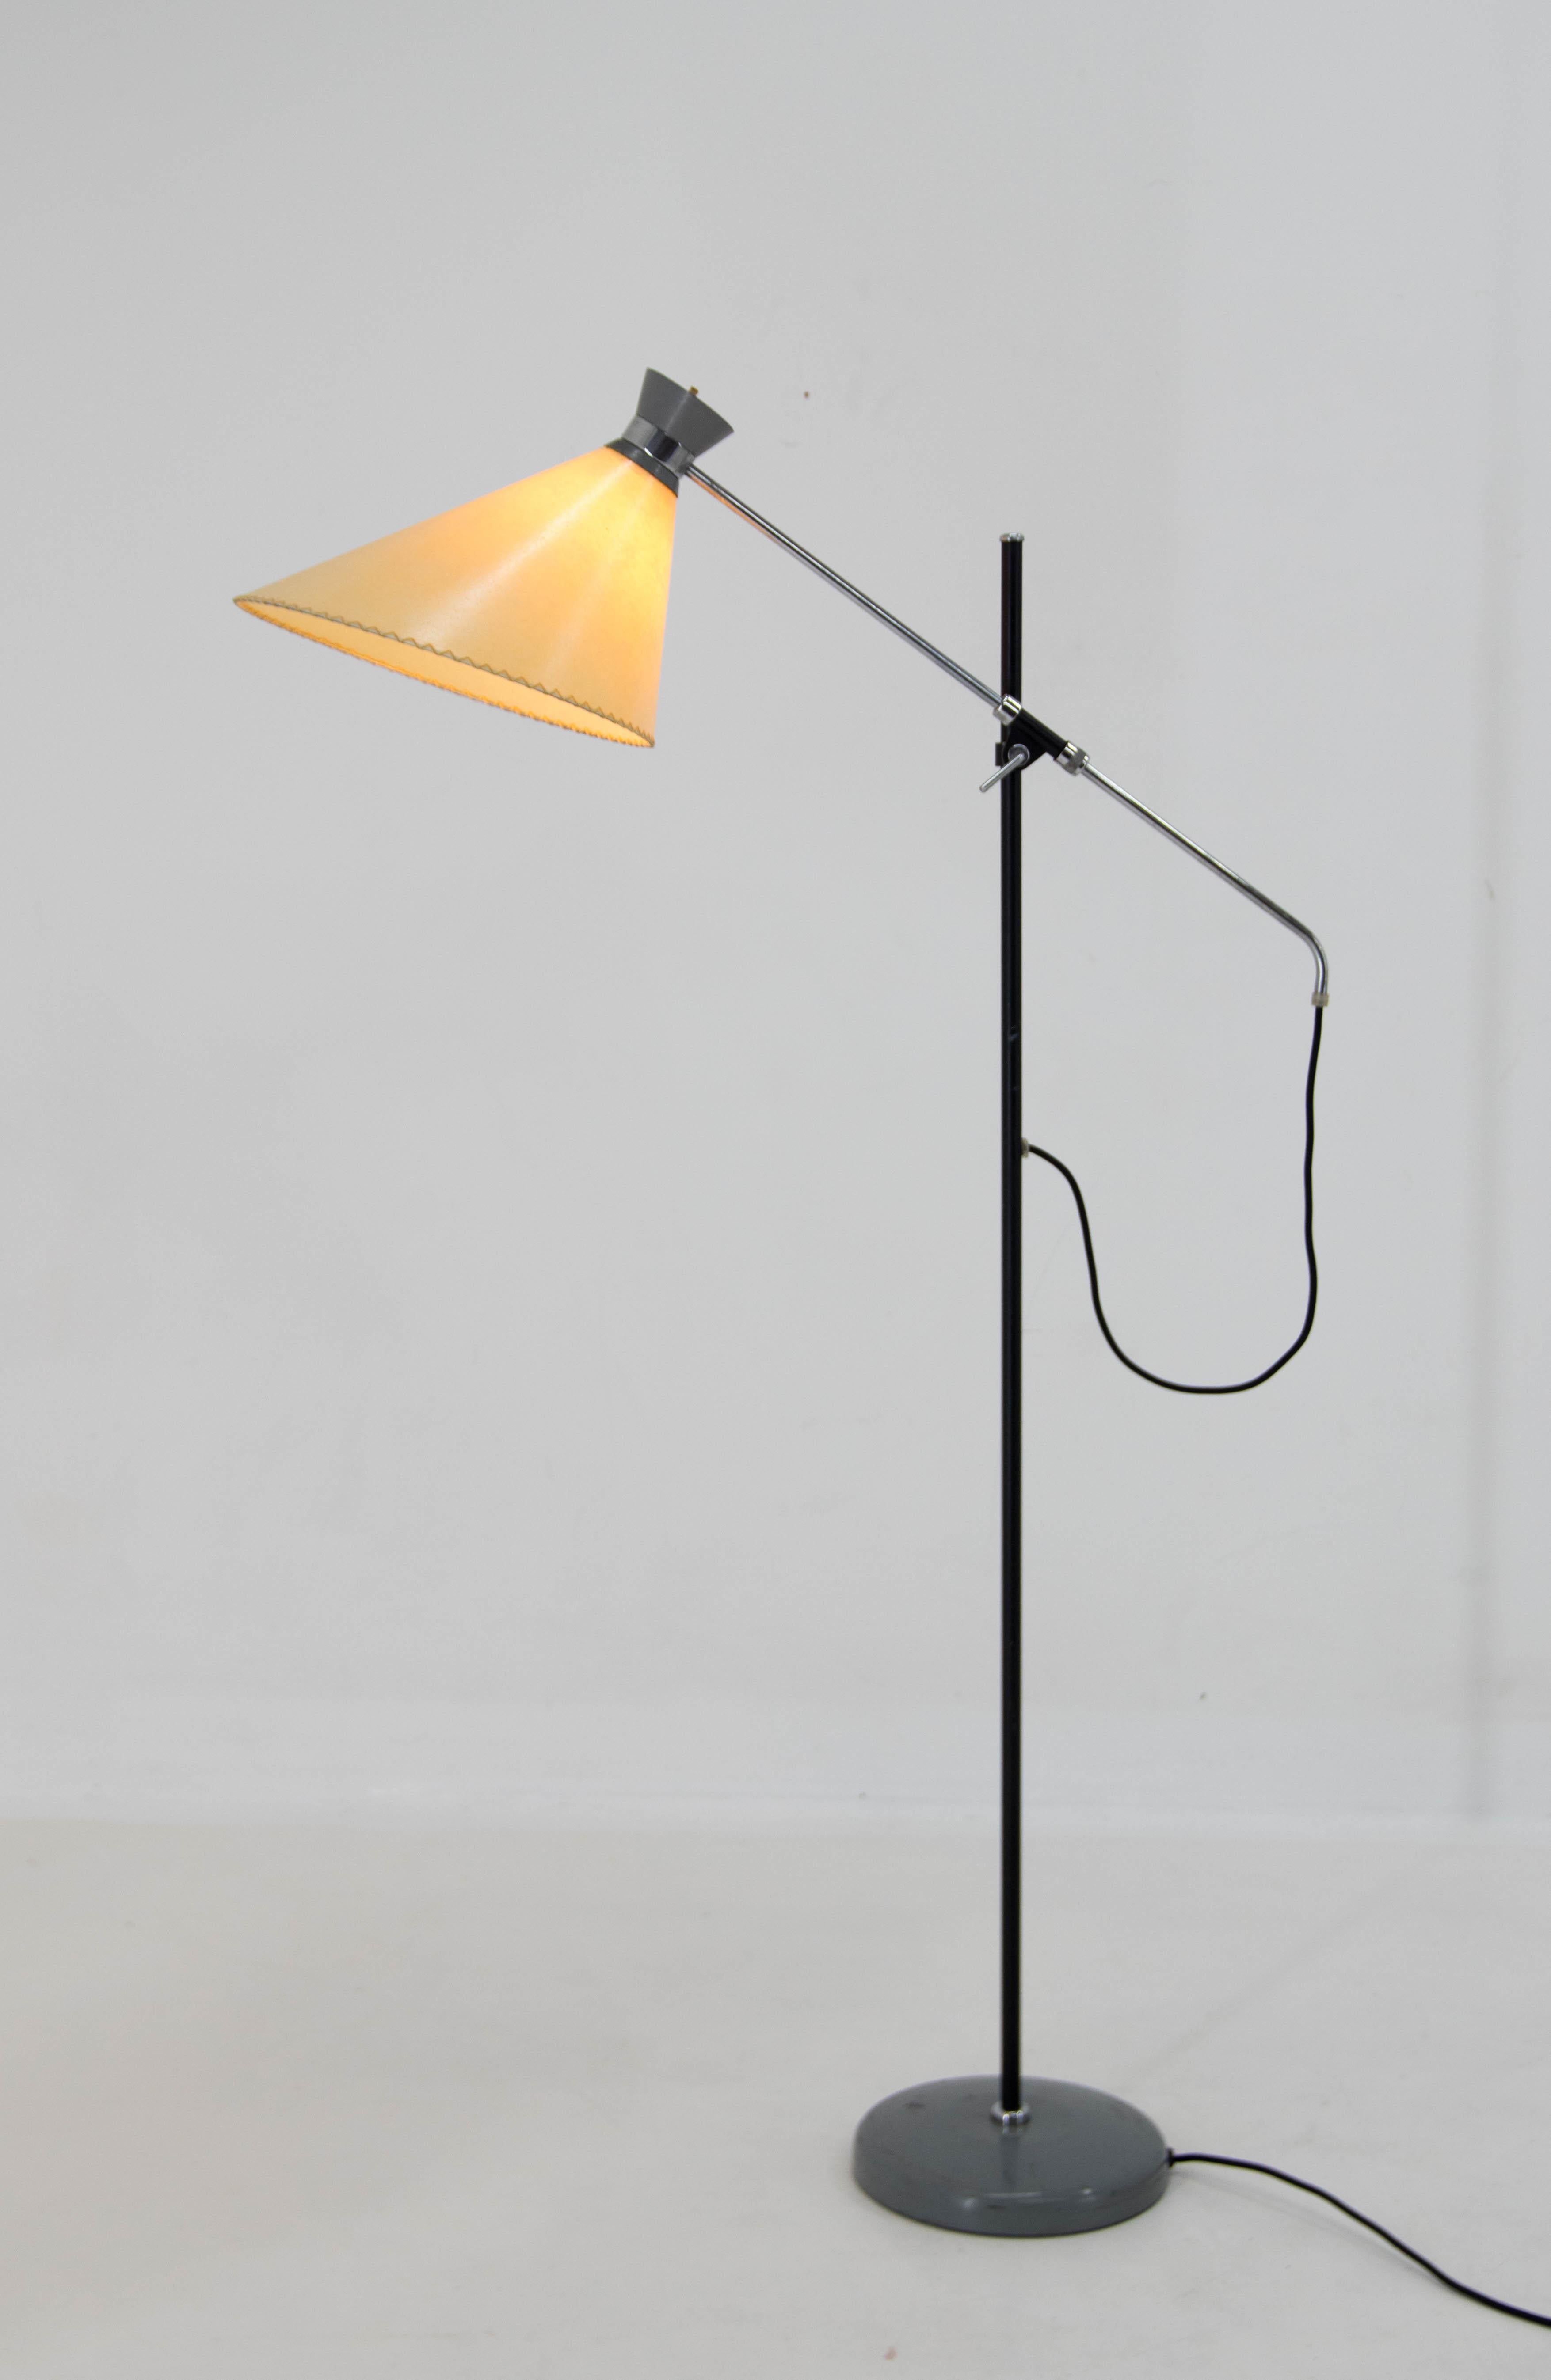 Floor lamp with metal base and new parchment paper shade.
Measures: Maximum height: 180cm
Minimum height: 130cm
Rewired: 1x60W, E25-E27 bulb
US plug adapter included.